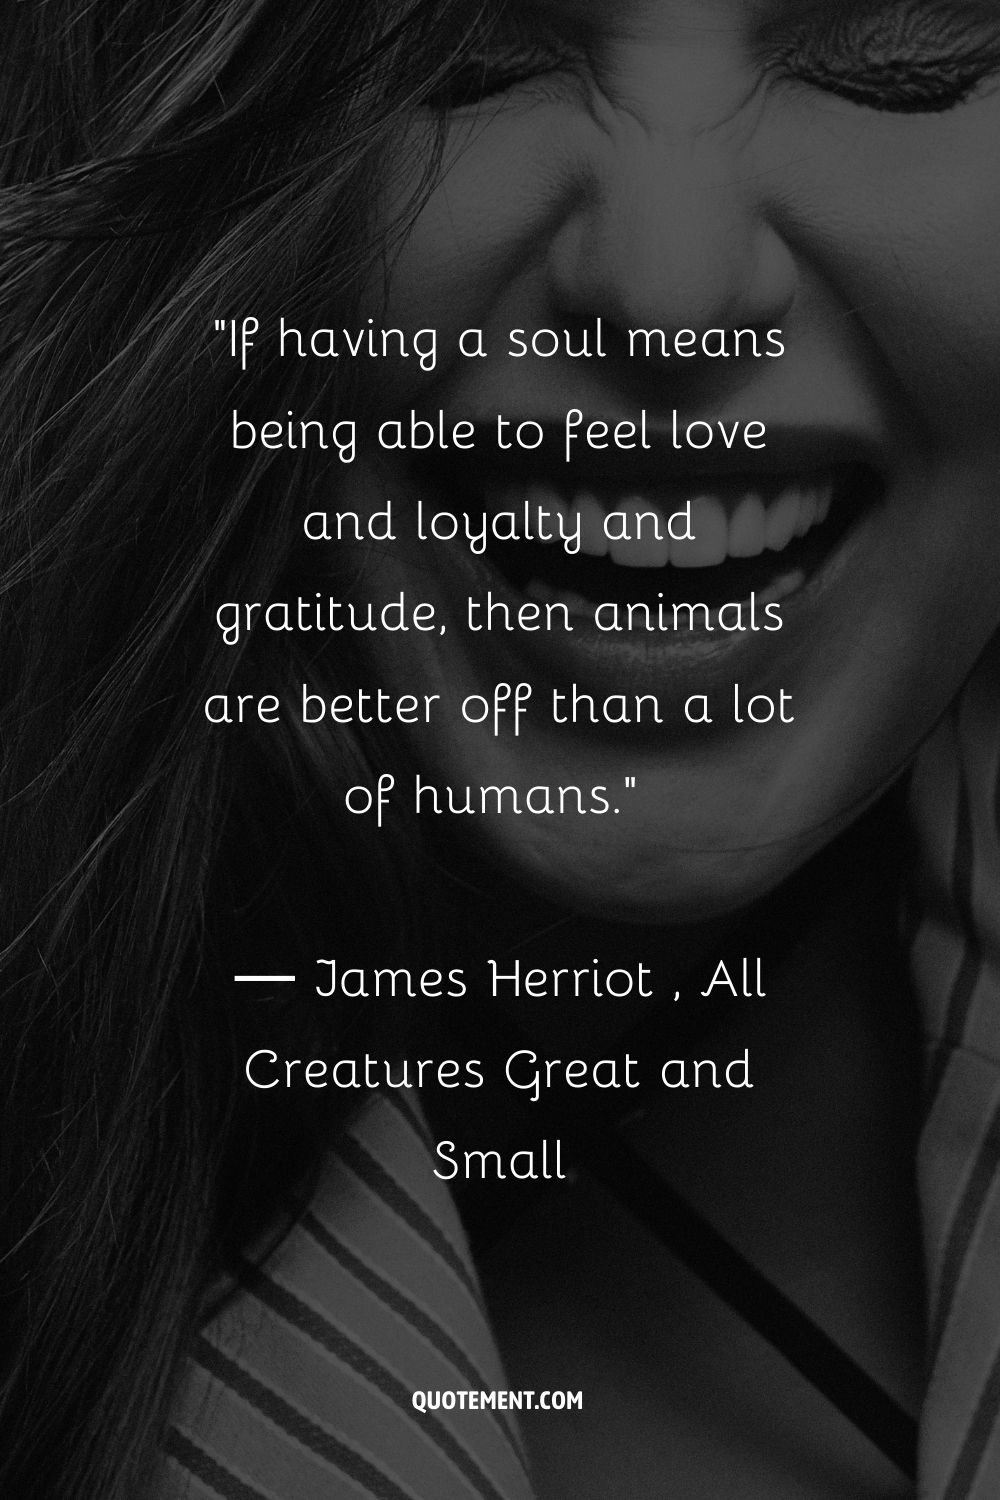 If having a soul means being able to feel love and loyalty and gratitude, then animals are better off than a lot of humans